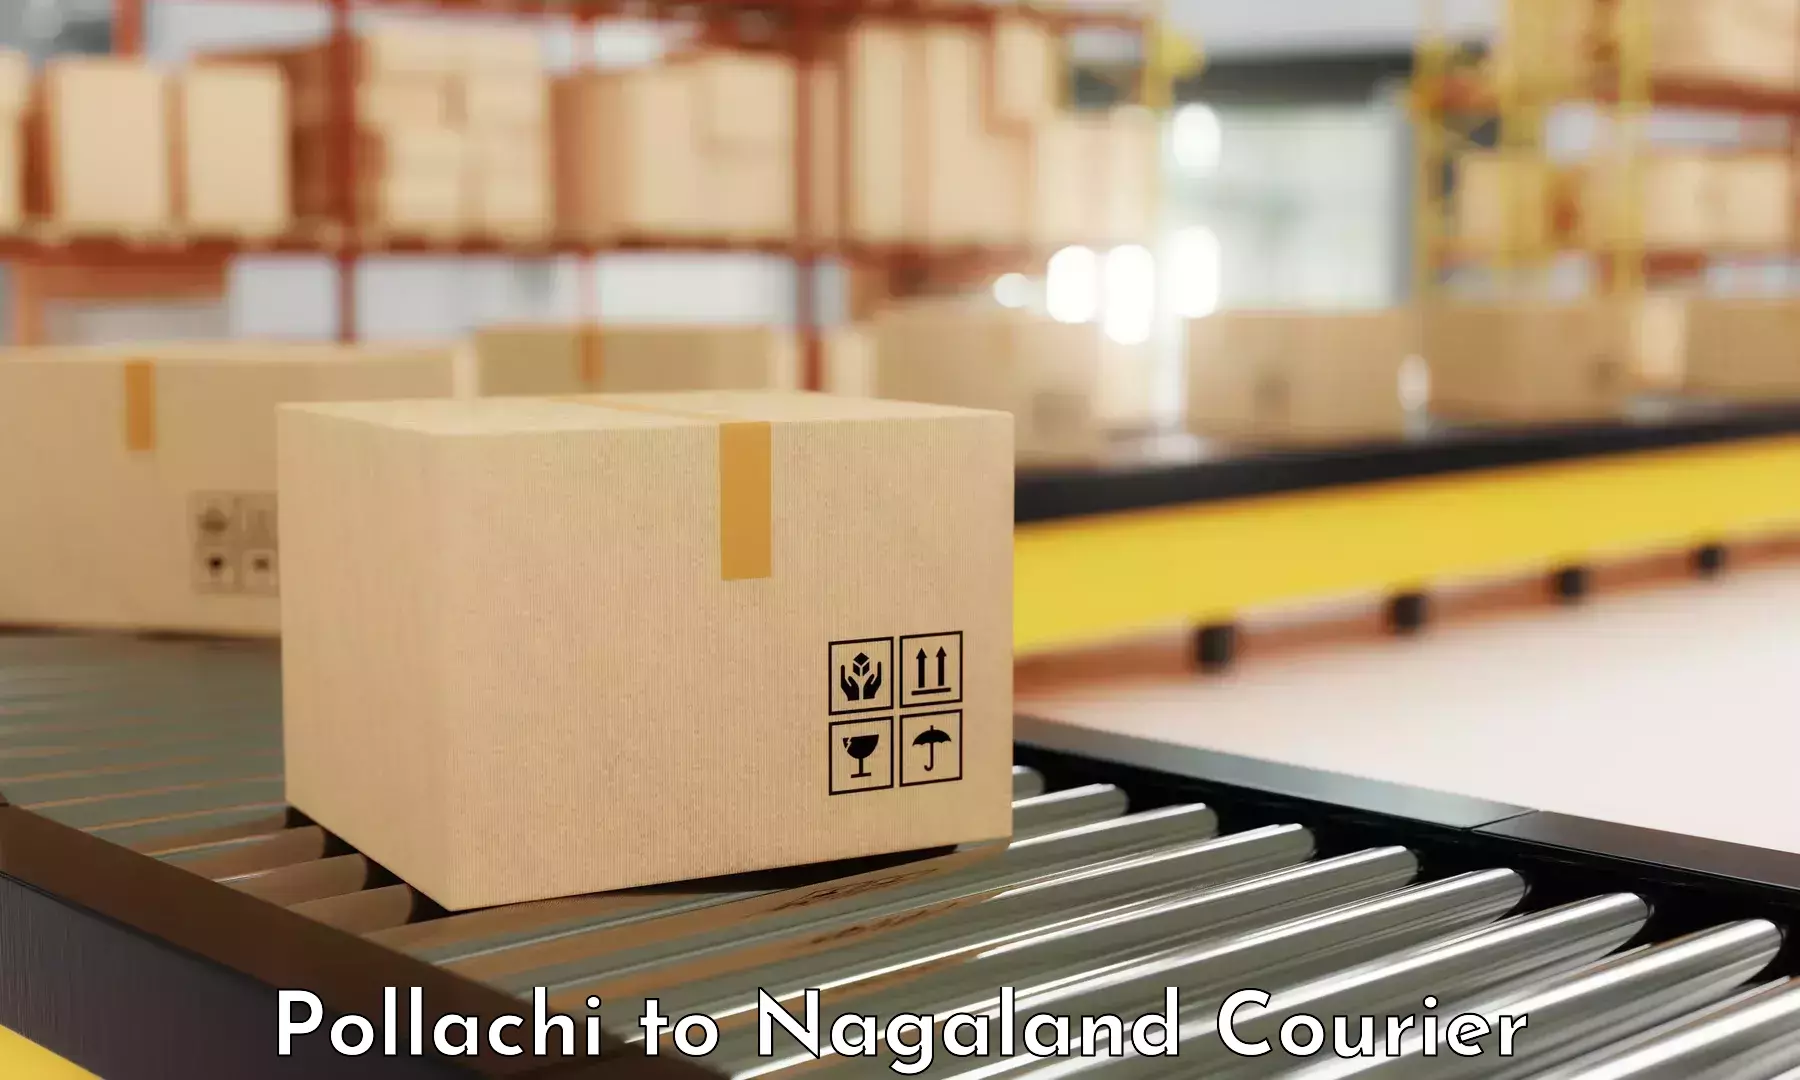 Nationwide delivery network Pollachi to Chumukedima